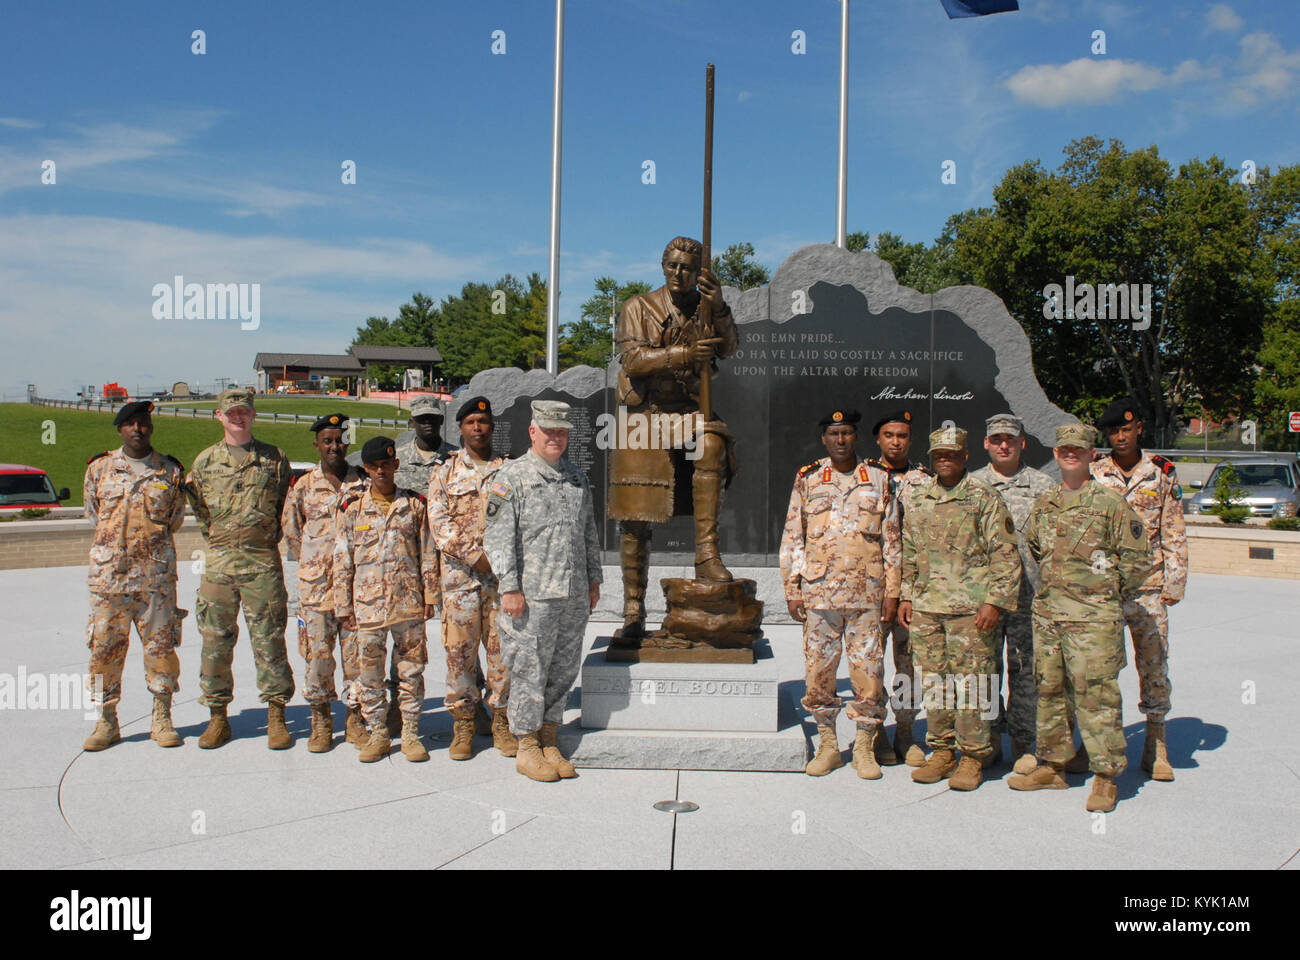 Members of the Djibouti military visits Soldiers of the Kentucky National Guard in Frankfort, Ky., August, 2016. (Photo by Capt. Aaron VanSickle) Stock Photo